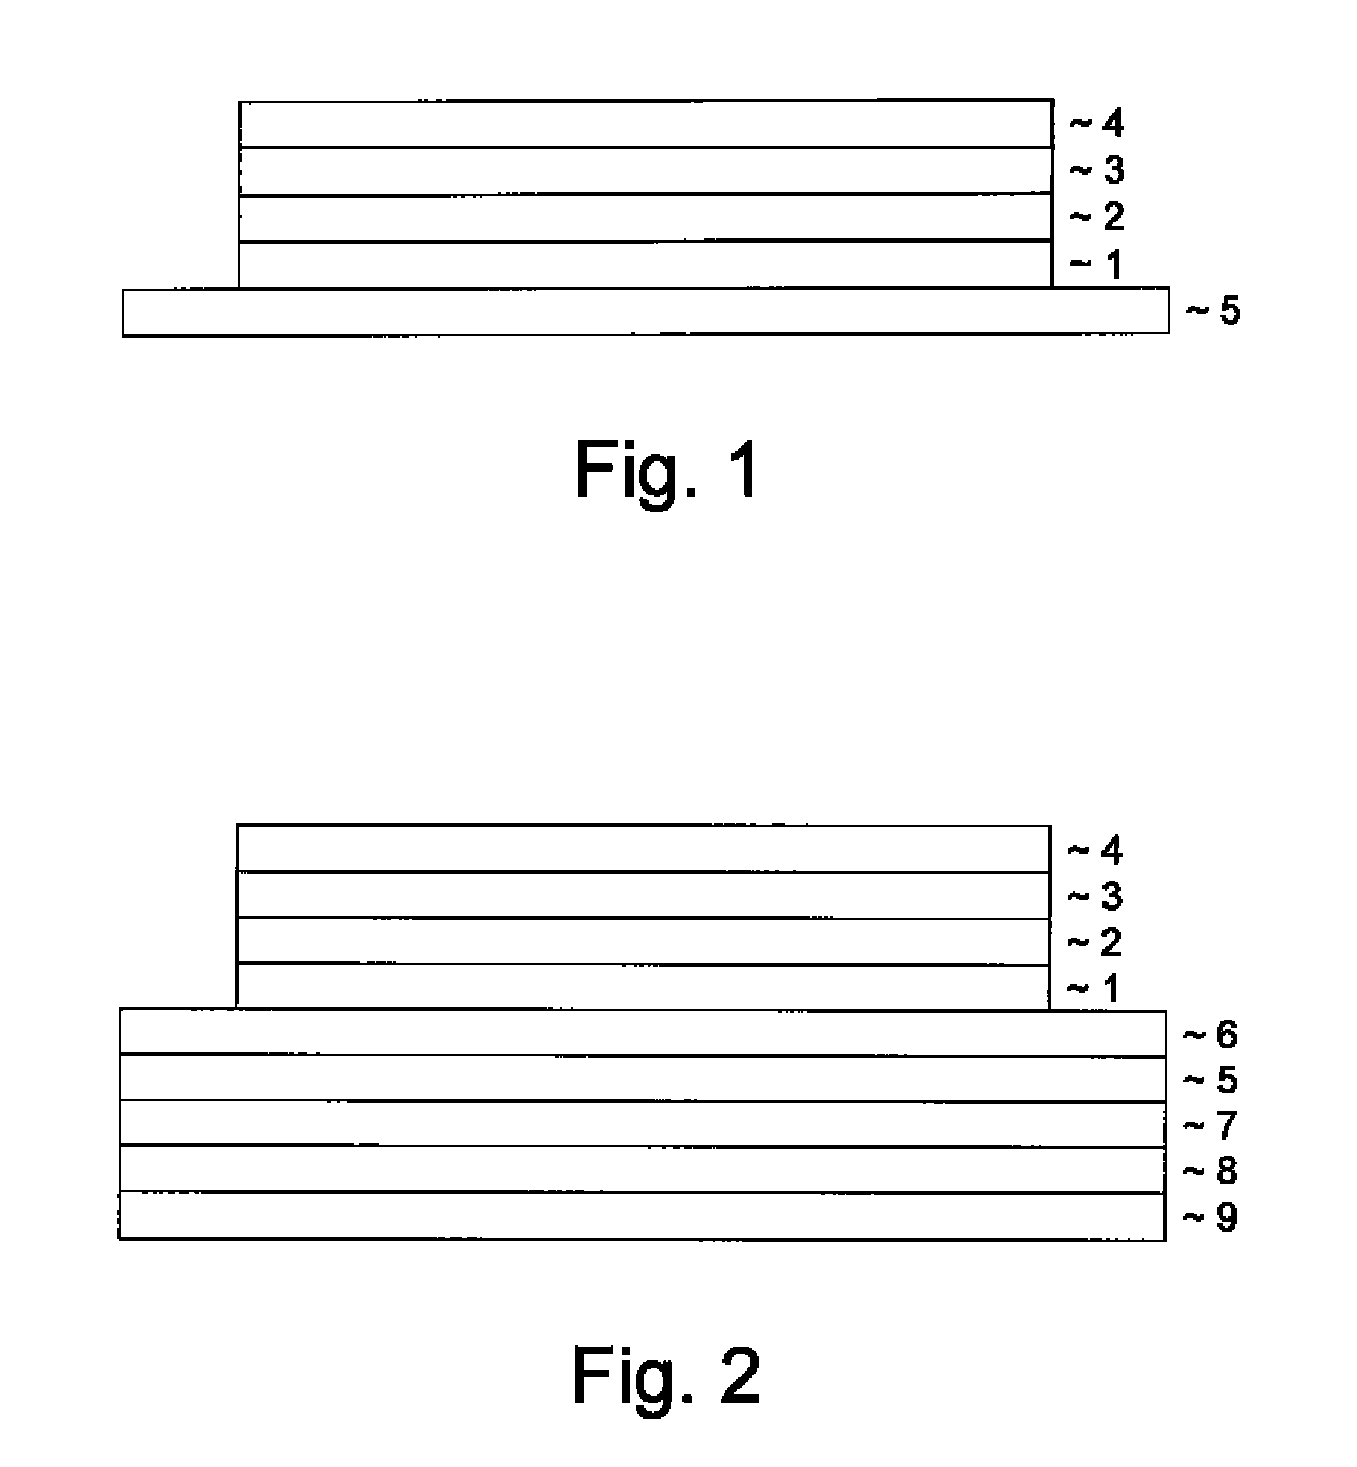 Organic electroluminescent device comprising ceramic sheet and graphite sheet